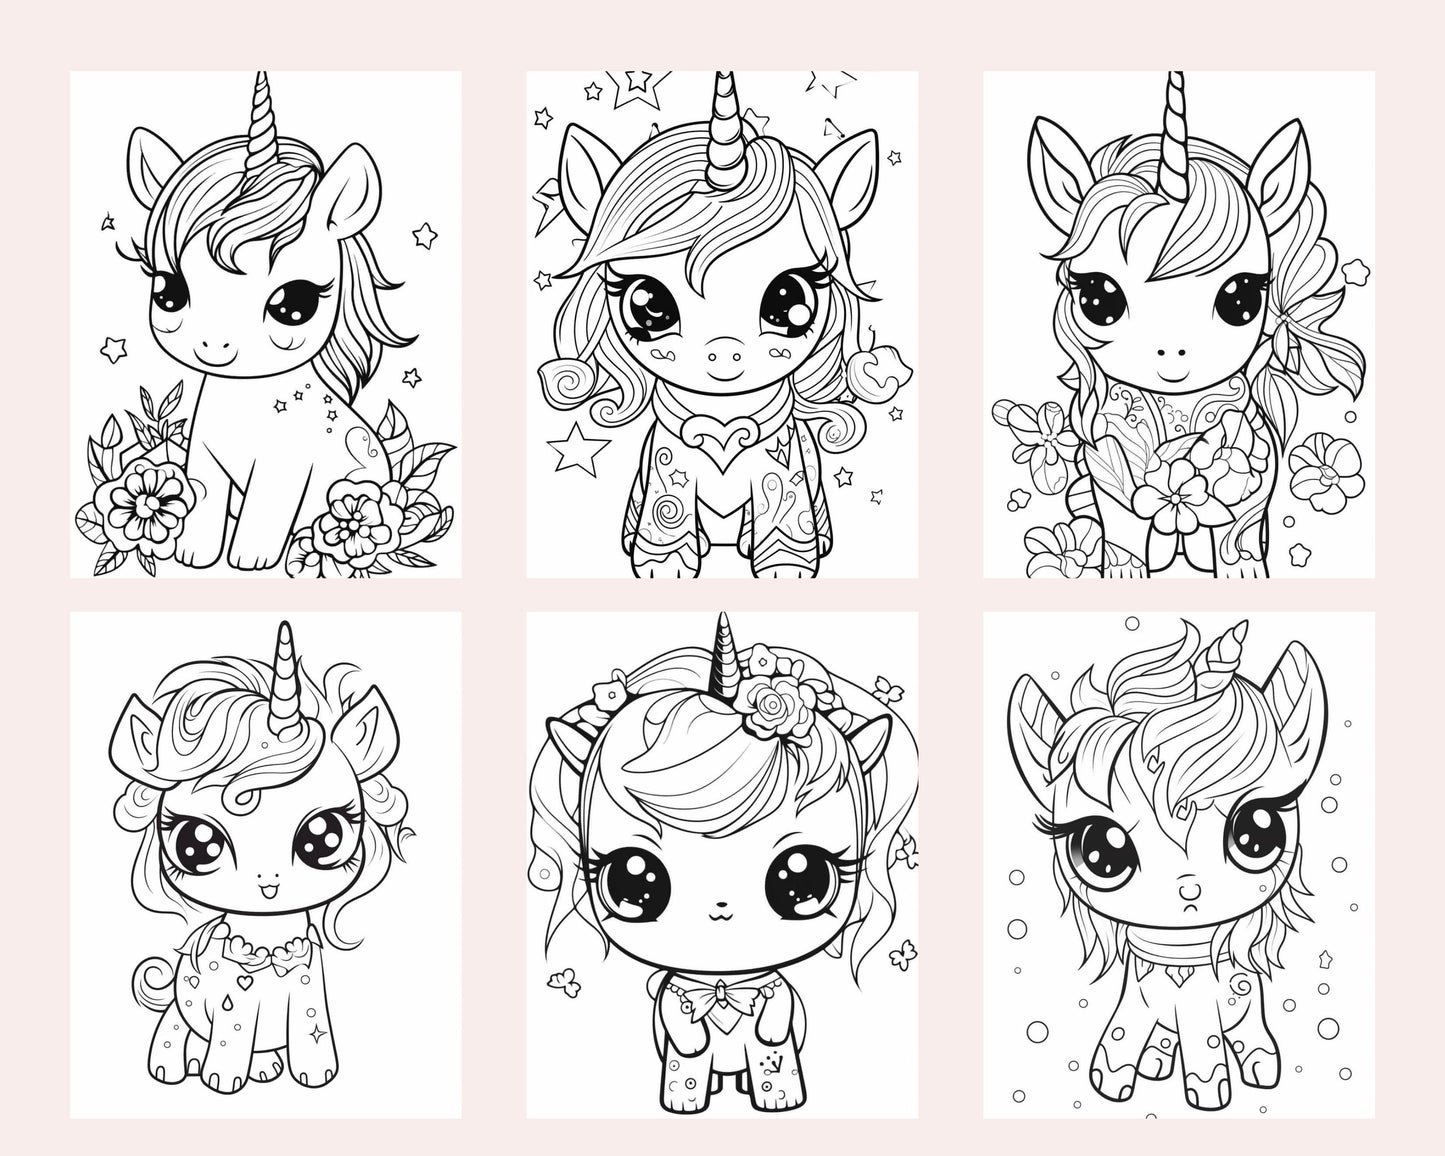 80 Cute Unicorn Printable Coloring Pages for Kids, Printable PDF File Instant Download - raspiee